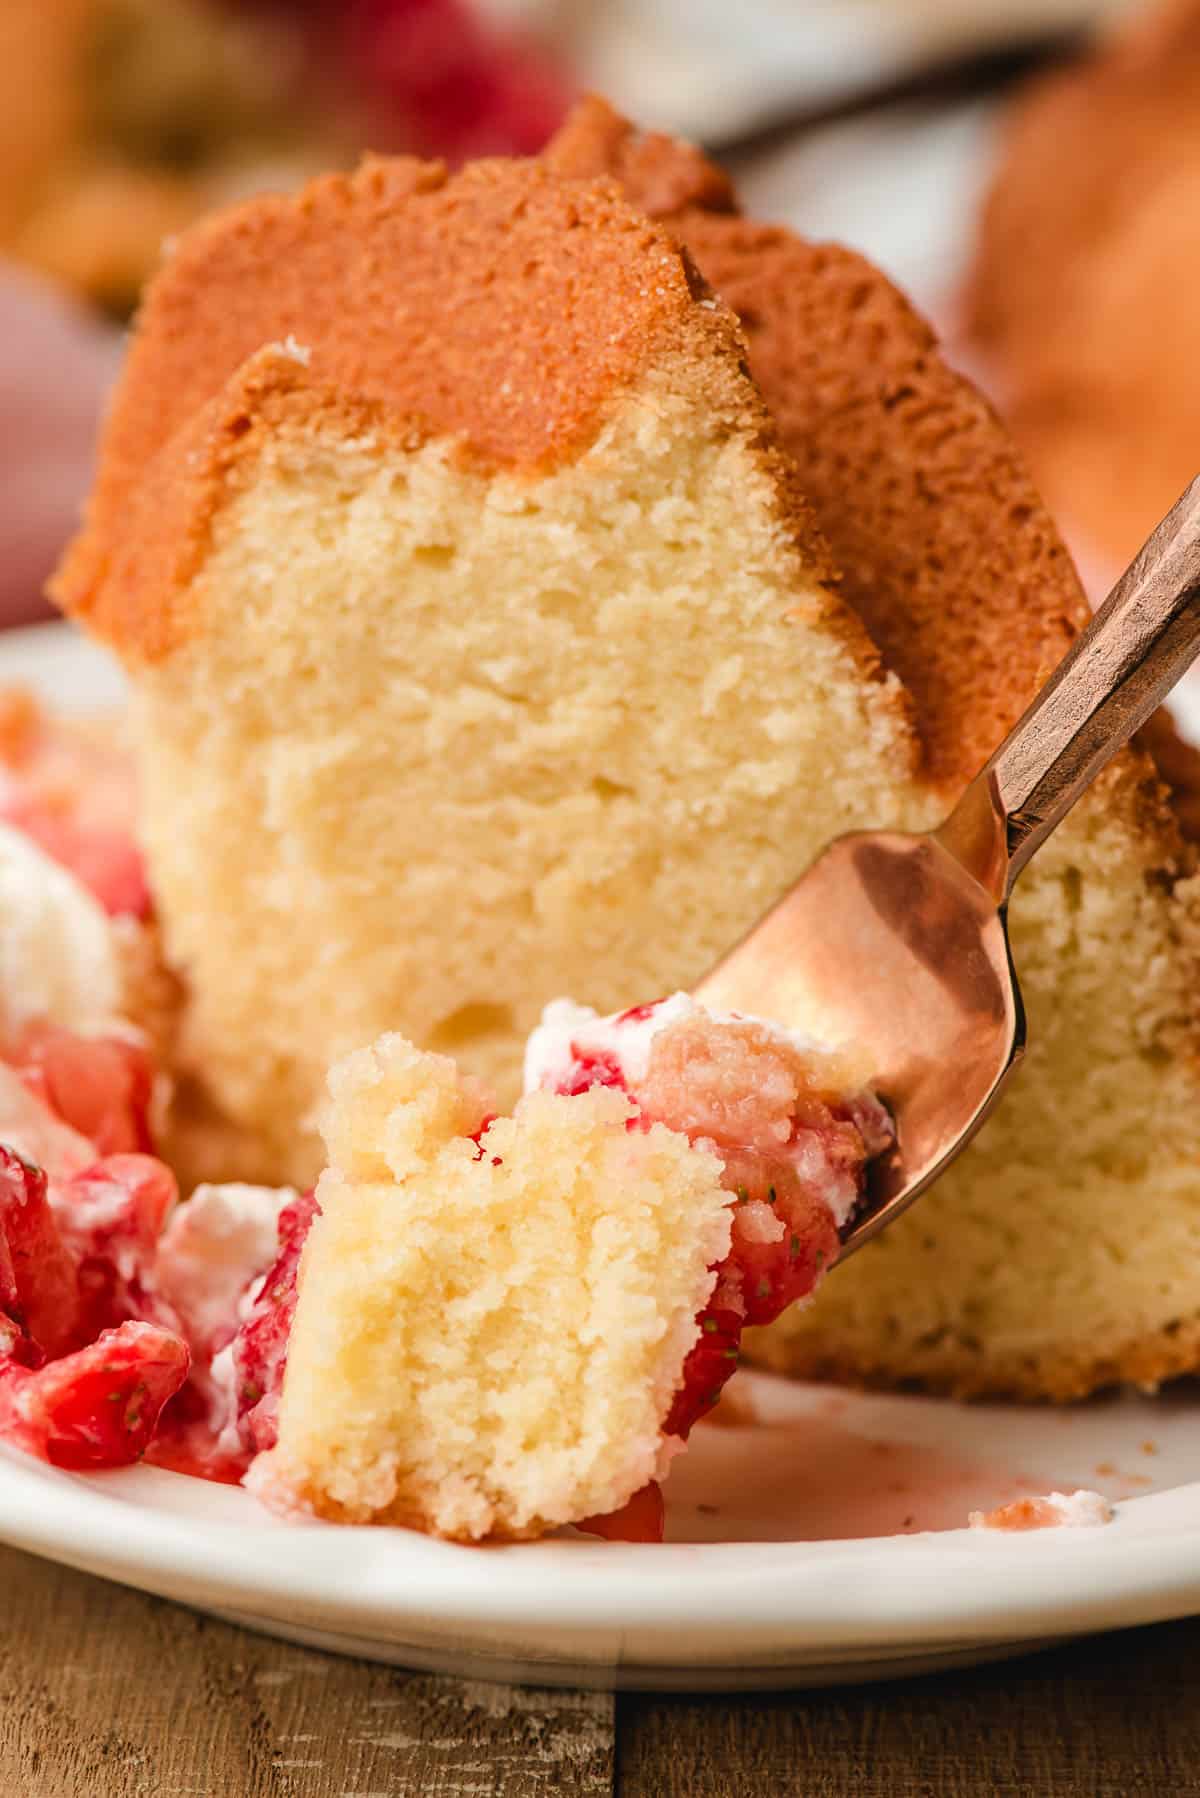 A bite of old fashioned pound cake with strawberries and whipped cream on a golden fork.